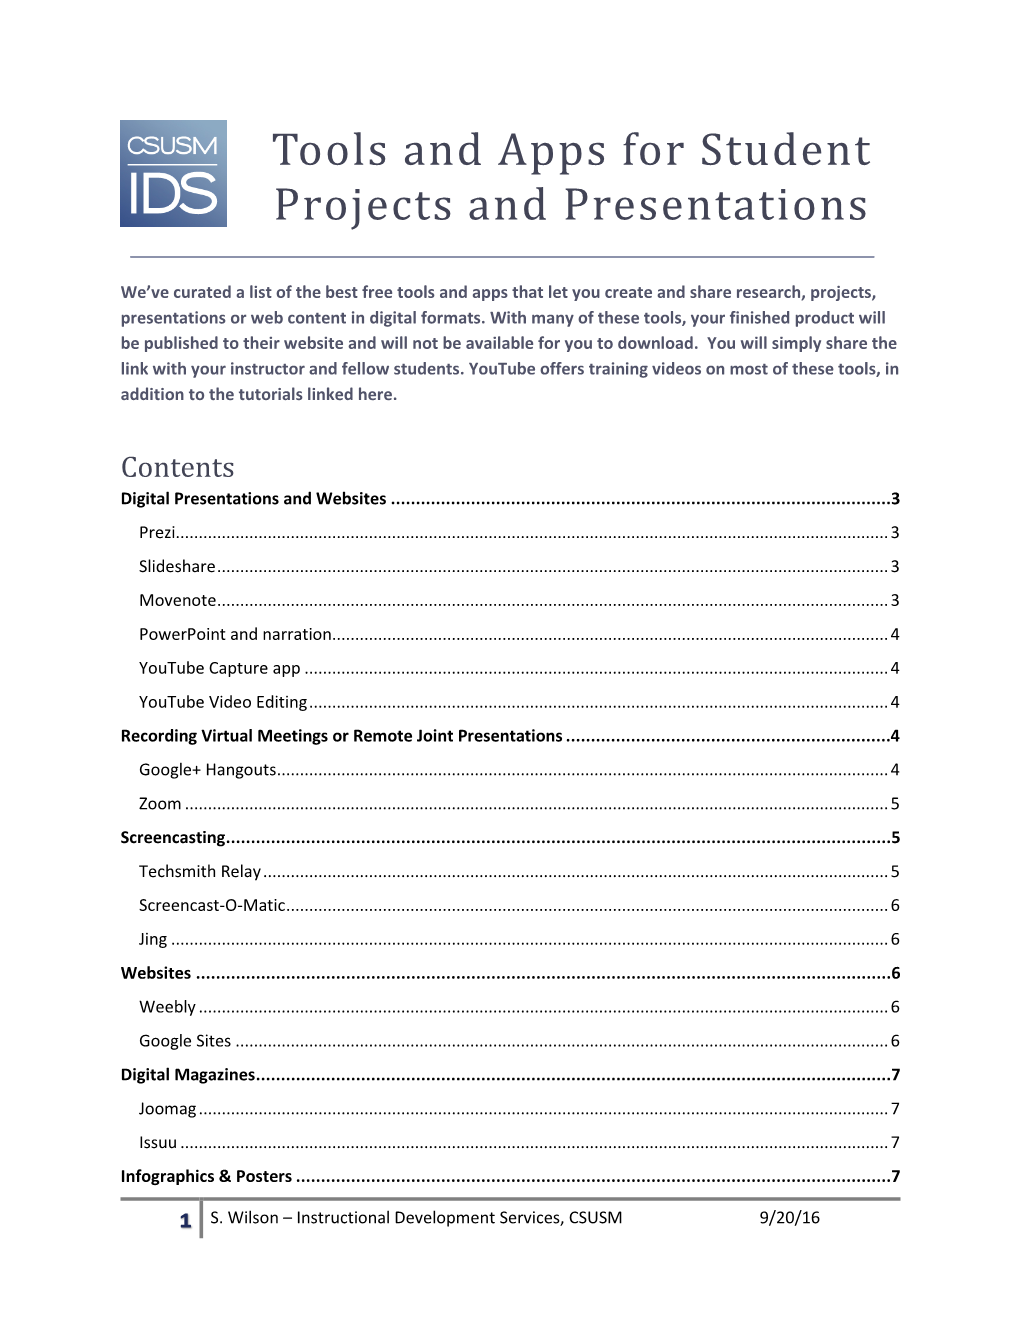 Tools and Apps for Student Projects and Presentations